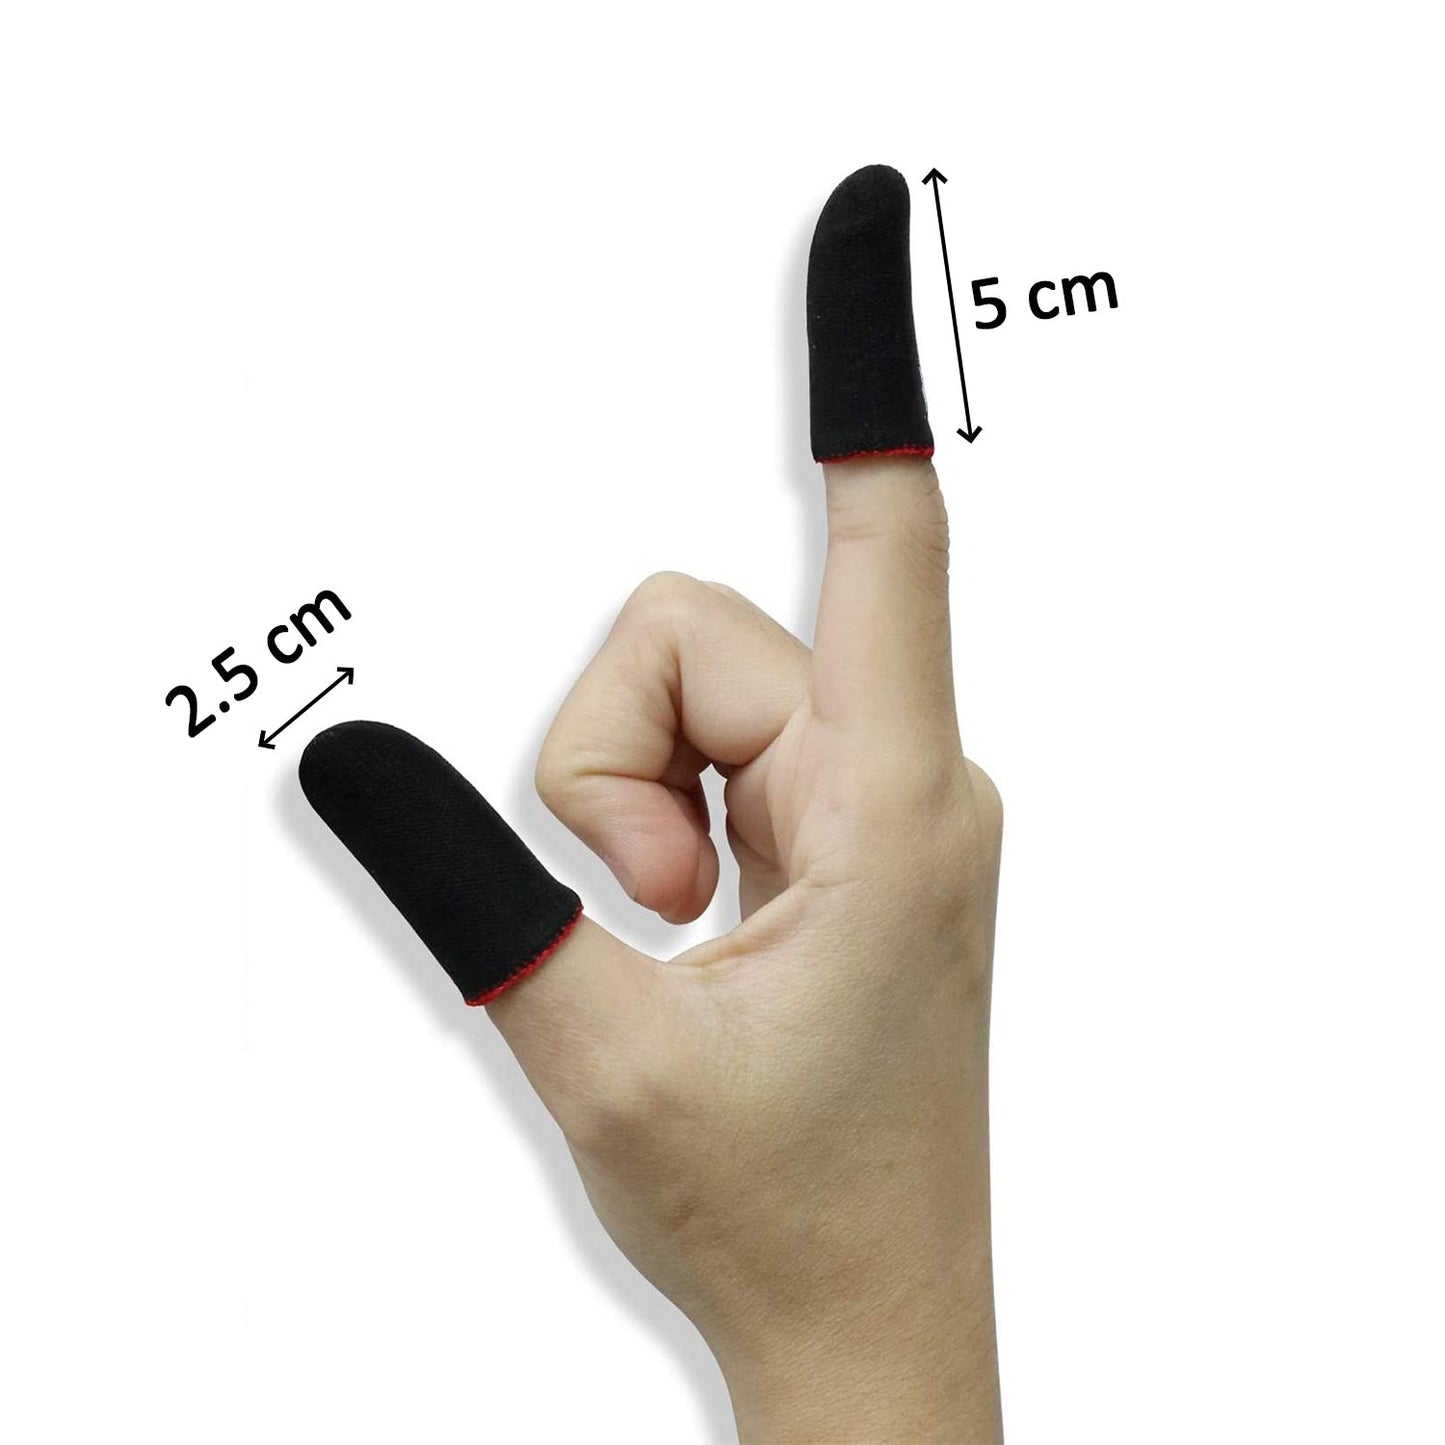 Thumb & Finger Sleeve for Mobile Game, Pubg,Cod,Freefire (1Pair only)